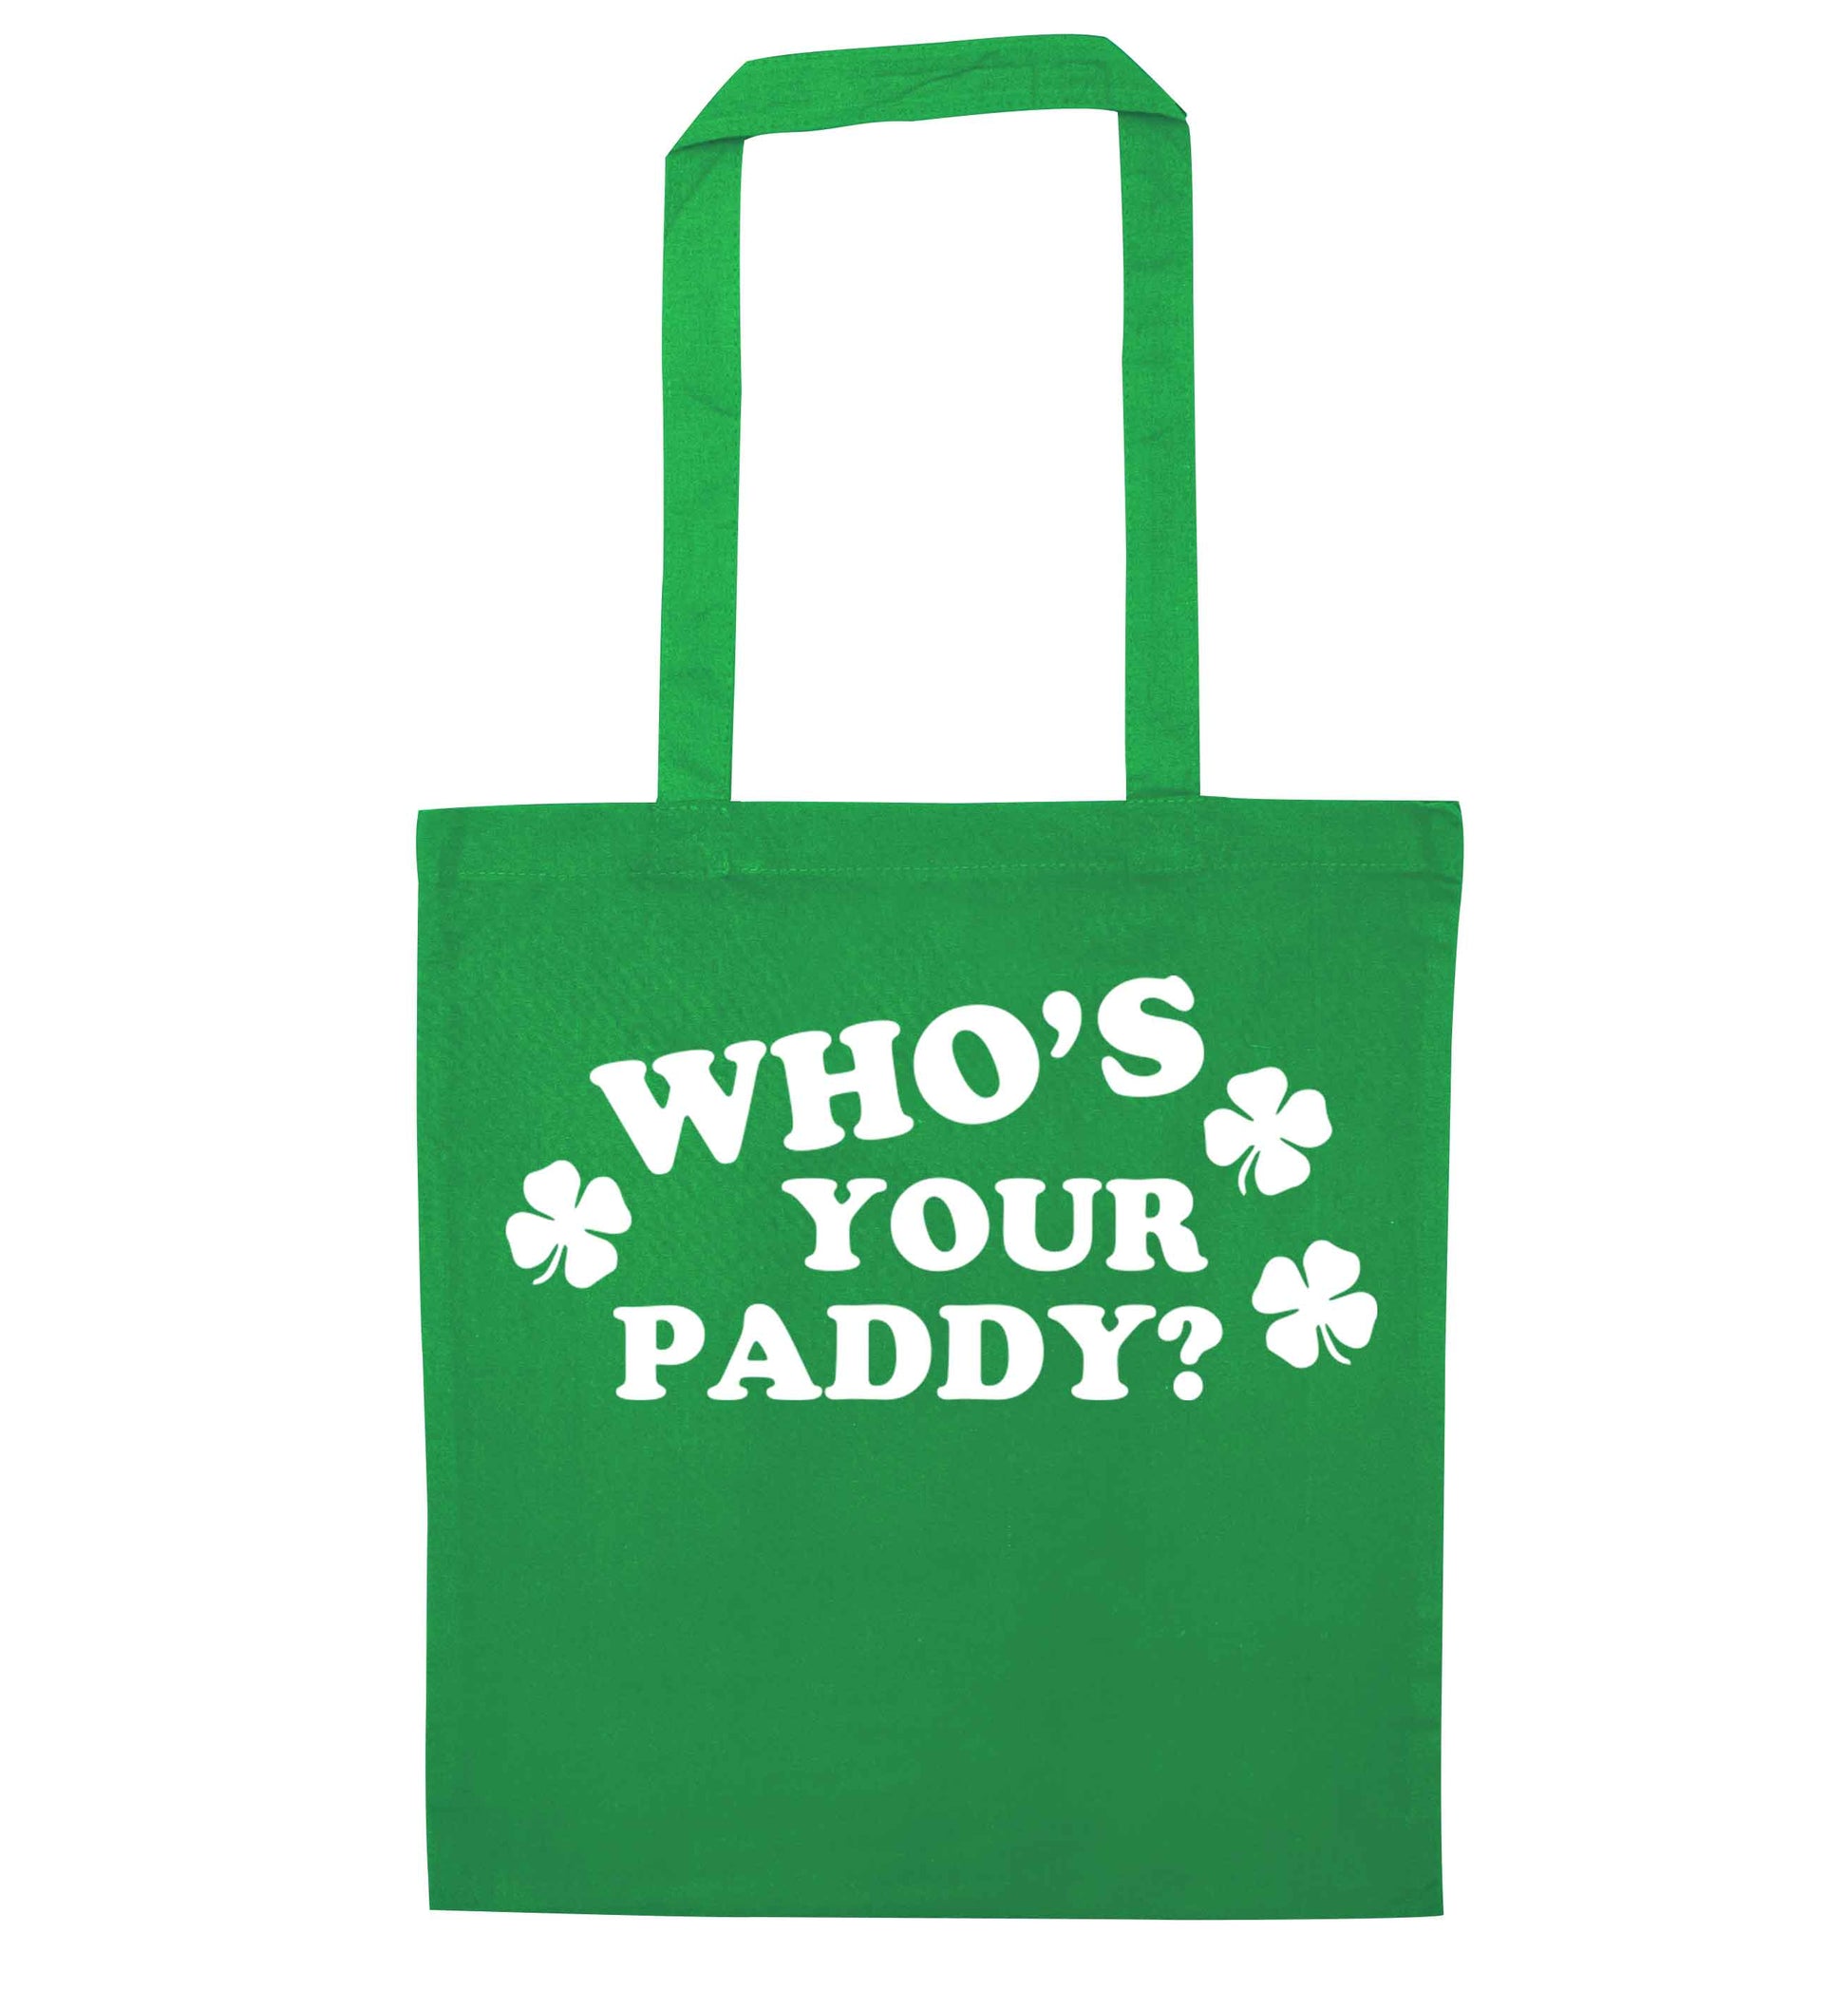 Who's your paddy? green tote bag